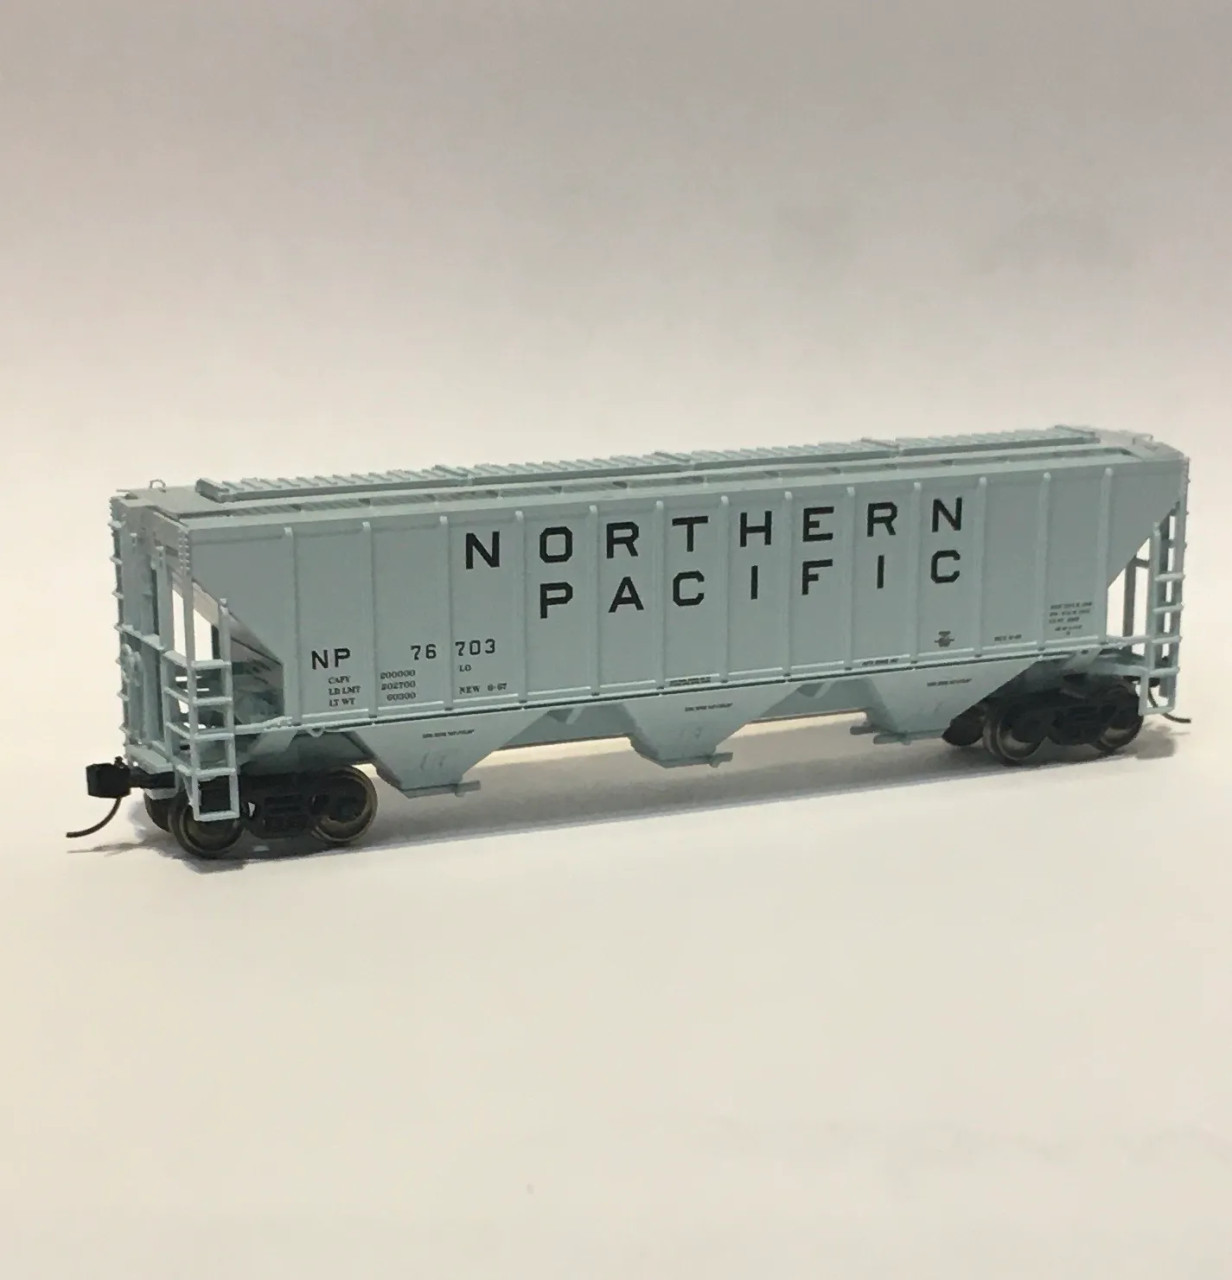 Trainworx 24433-06 N Pullman-Standard PS 4427 Covered Hopper - Northern Pacific # 76995